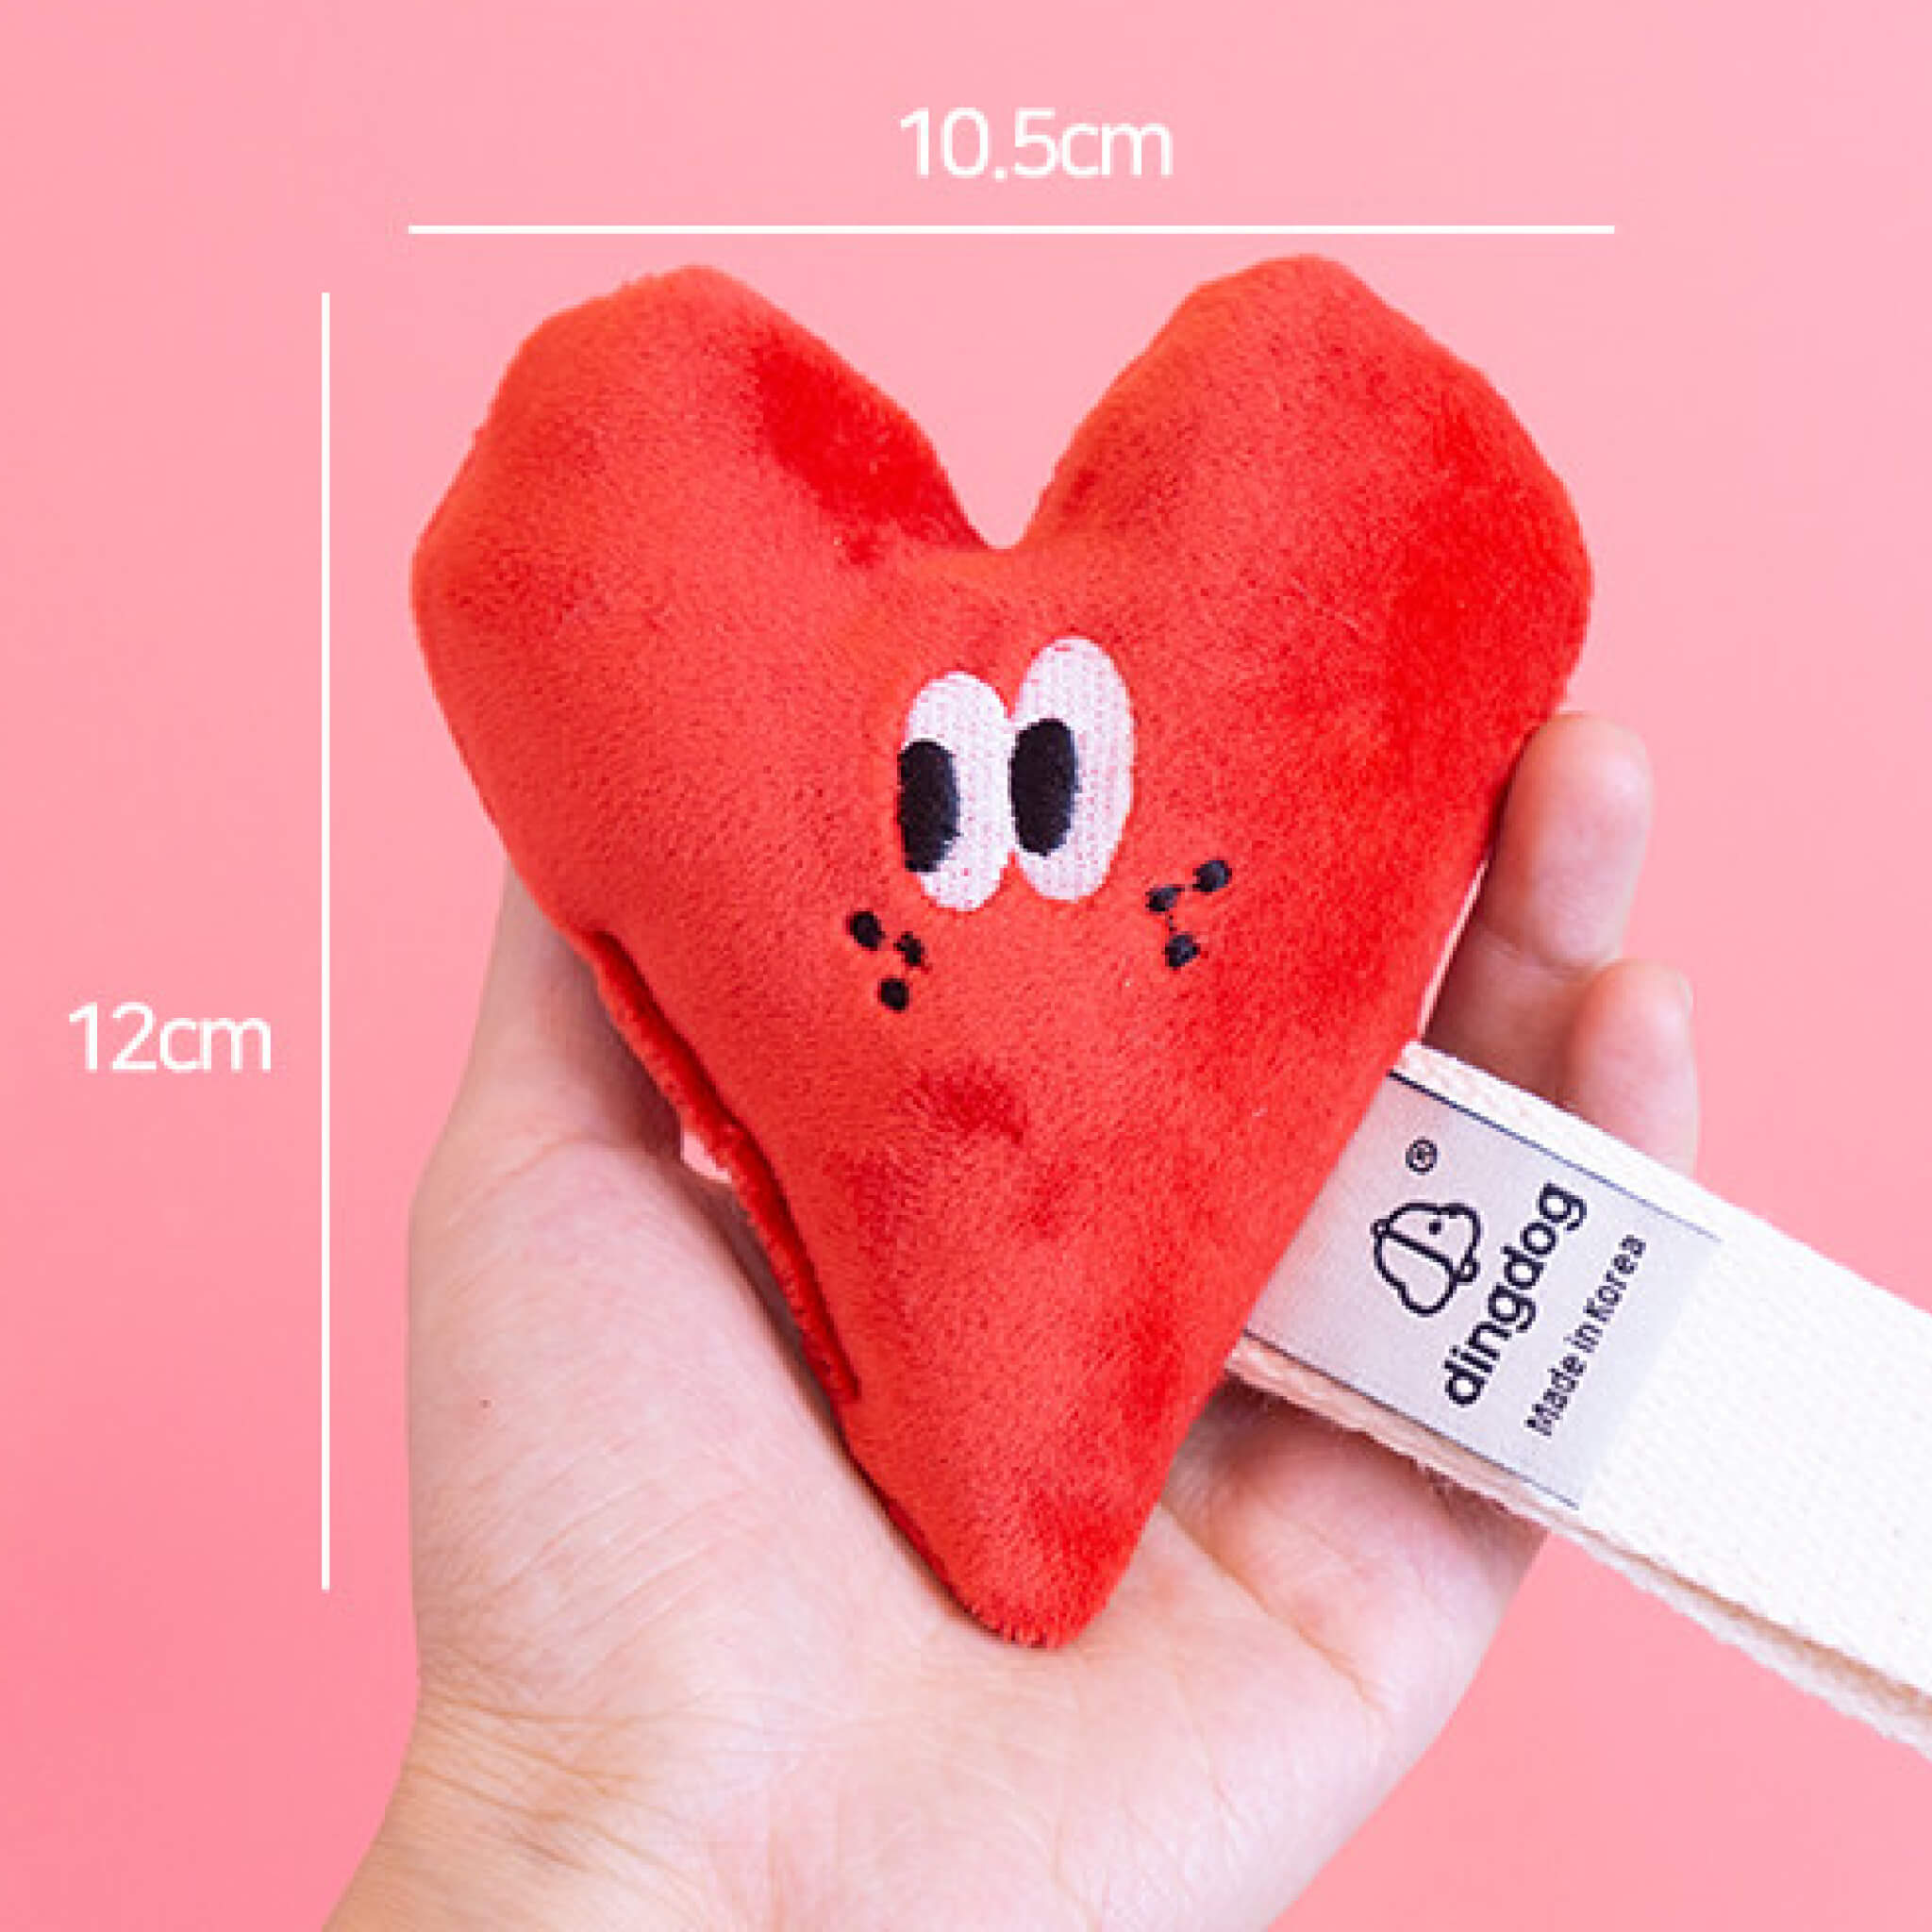 Dimensions for heart toy.